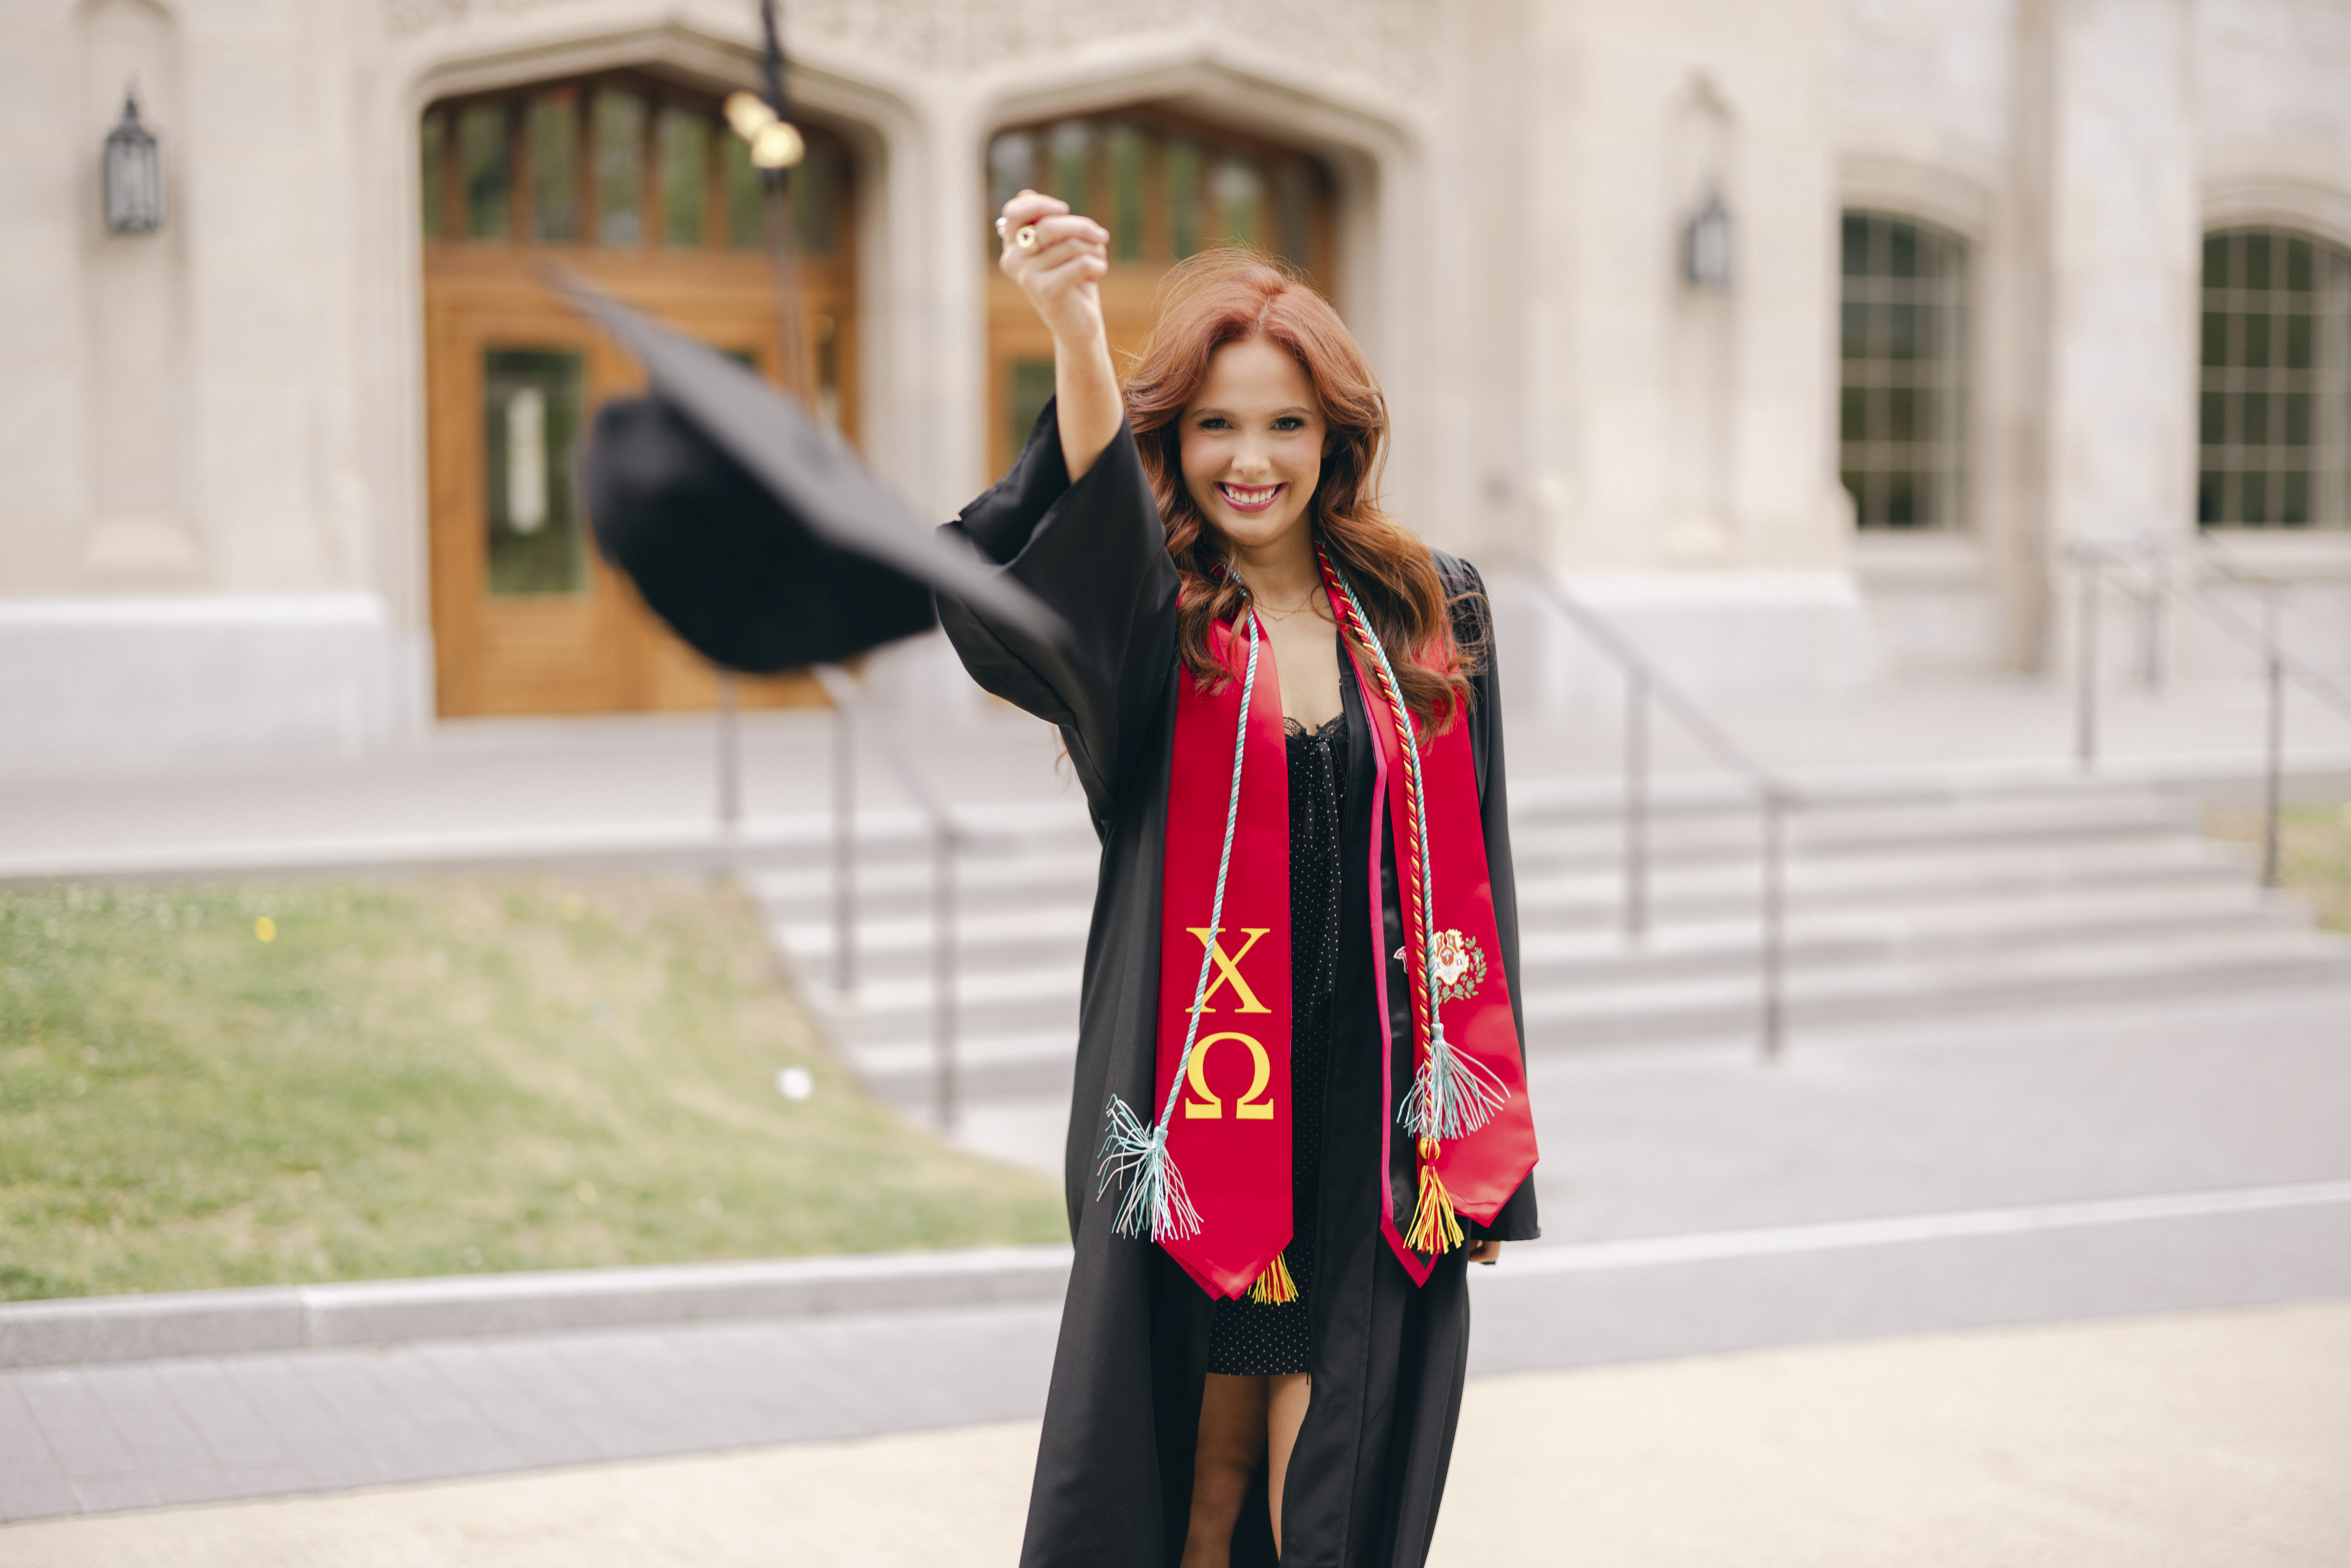 Graduate Portraits at University of Arkansas of gorgeous redhead college senior throwing her cap and wearing her gown.